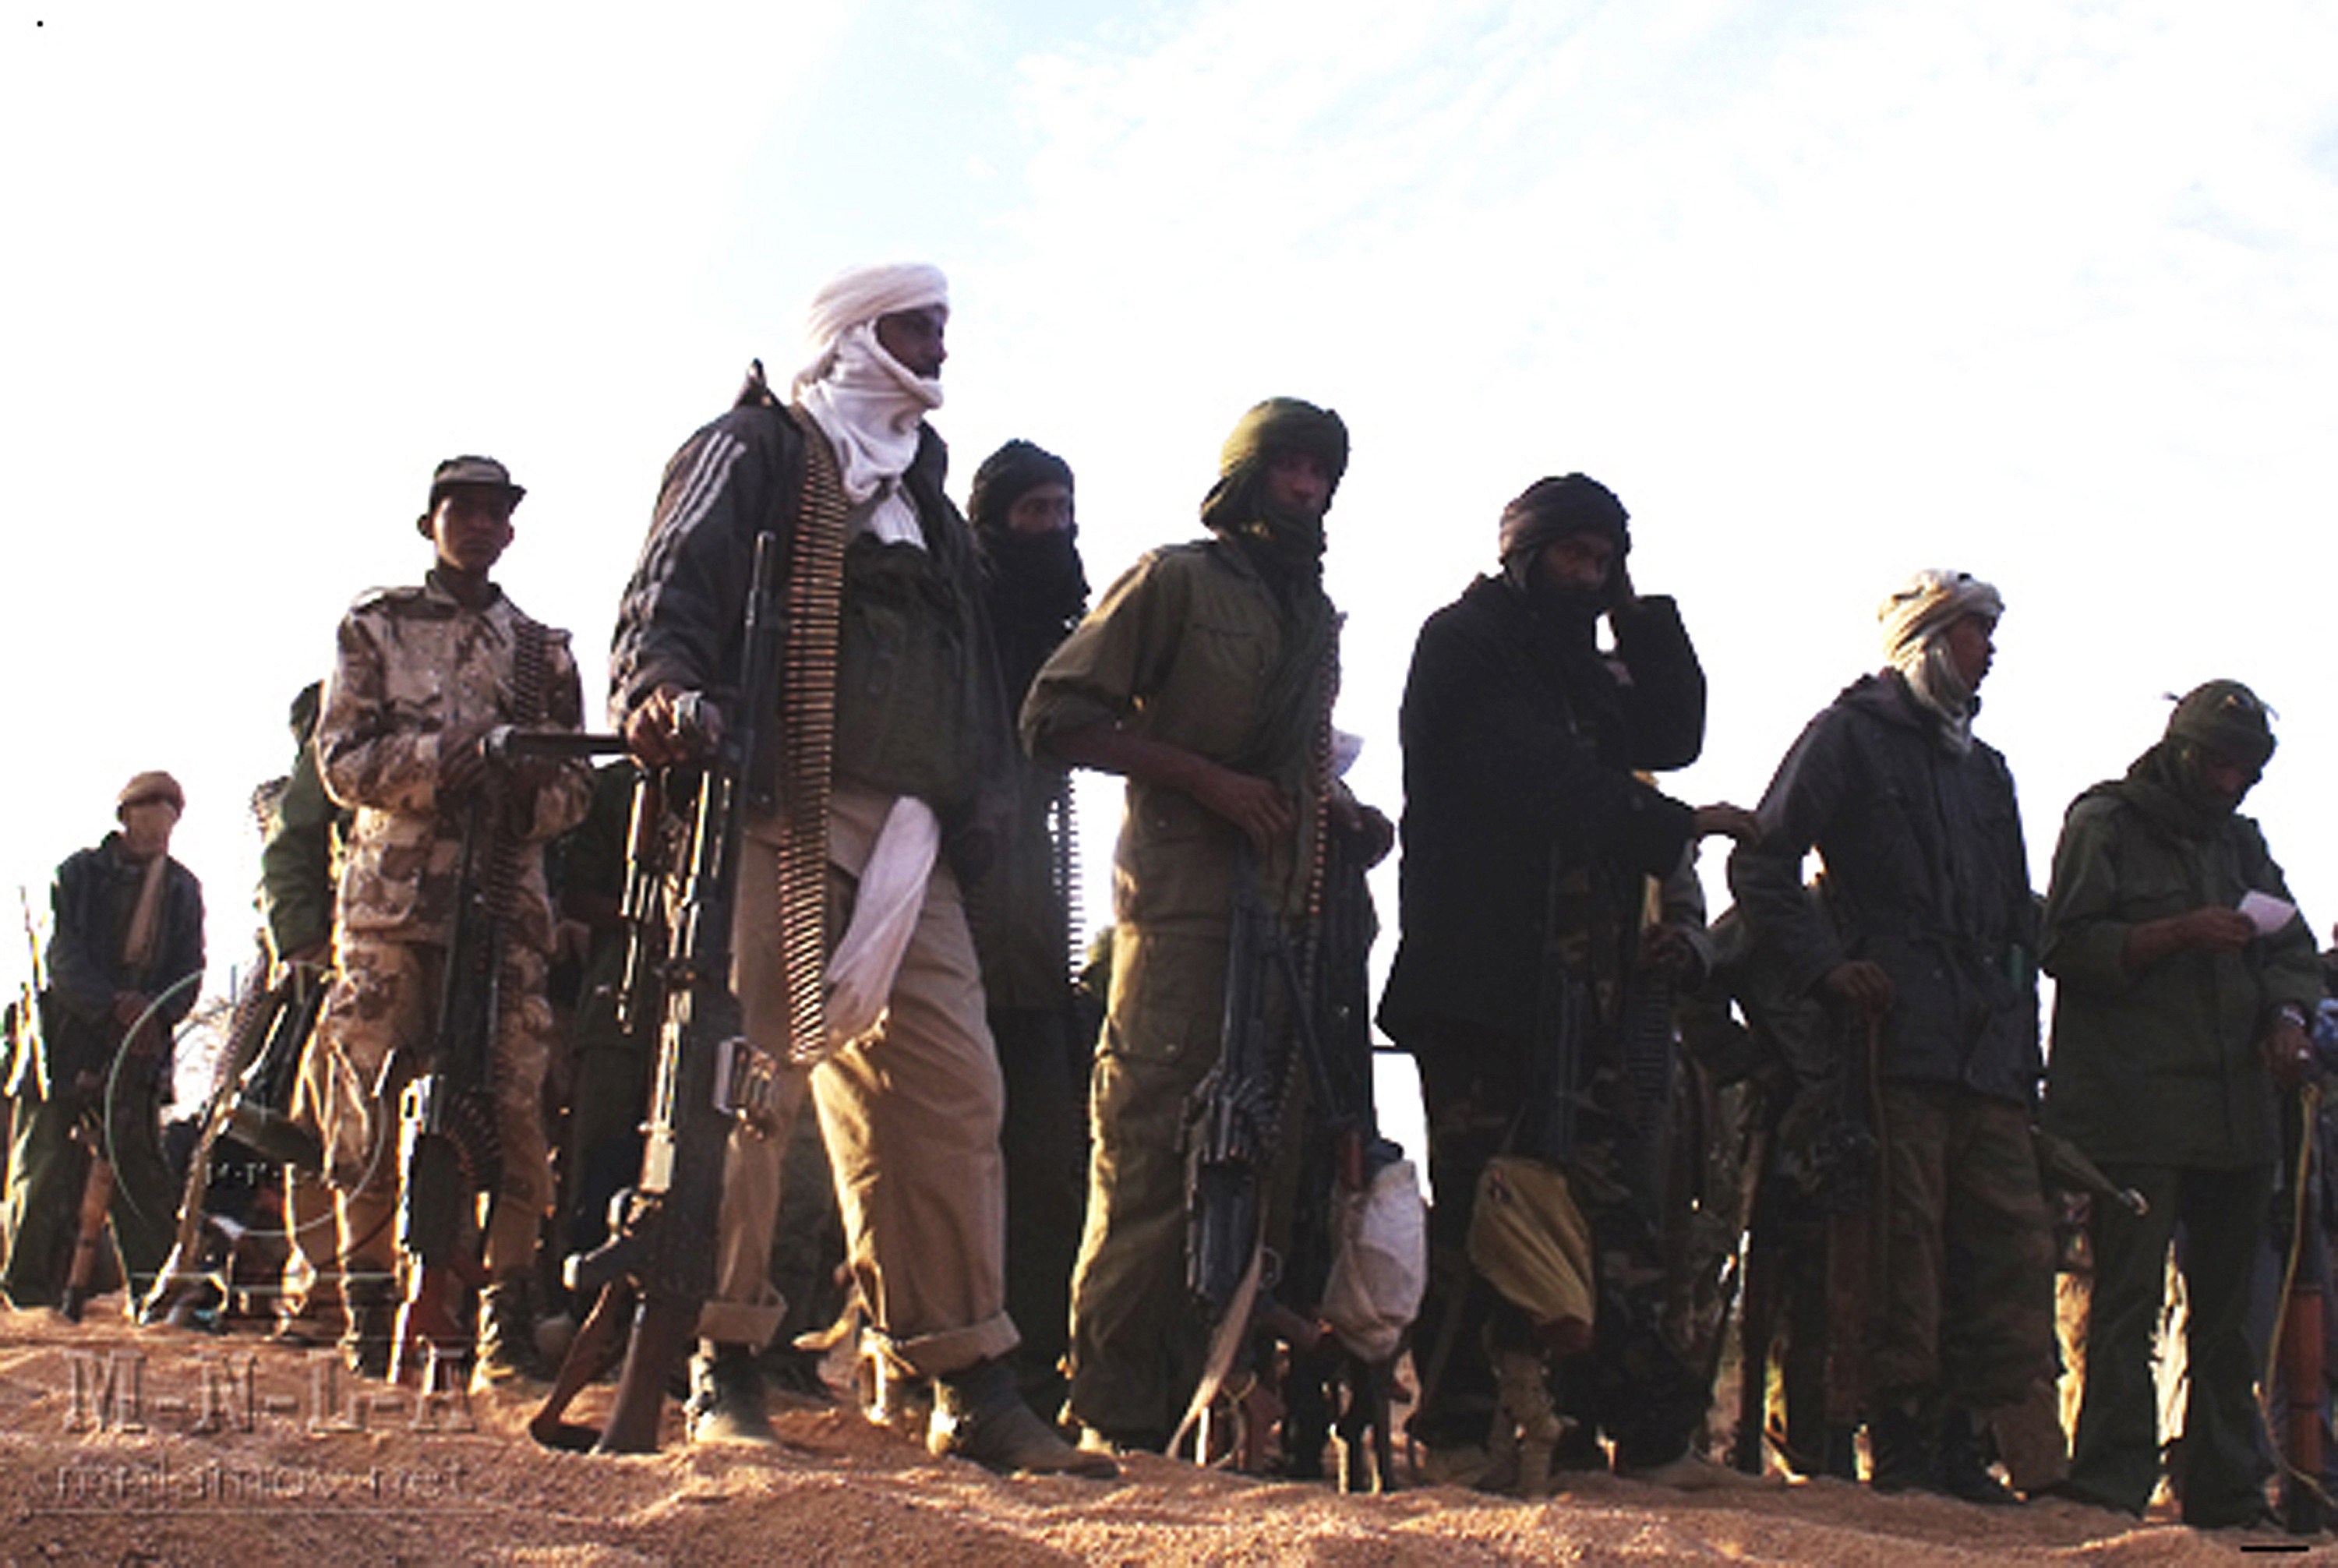 A handout picture released by the Mouvement national pour la libération de l'Azawad (Azawad National Liberation Movement - MLNA) on April 2, 2012 and taken in February 2012 reportedly shows MNLA fighters gathering in an undisclosed location in Mali. Islamist and Tuareg rebels clashed in the key town of Gao in Mali's occupied north, leaving at least 20 people dead, witnesses said on June 27, 2012. " RESTRICTED TO EDITORIAL USE - MANDATORY CREDIT "AFP PHOTO / MNLA "- NO MARKETING NO ADVERTISING CAMPAIGNS - DISTRIBUTED AS A SERVICE TO CLIENTS